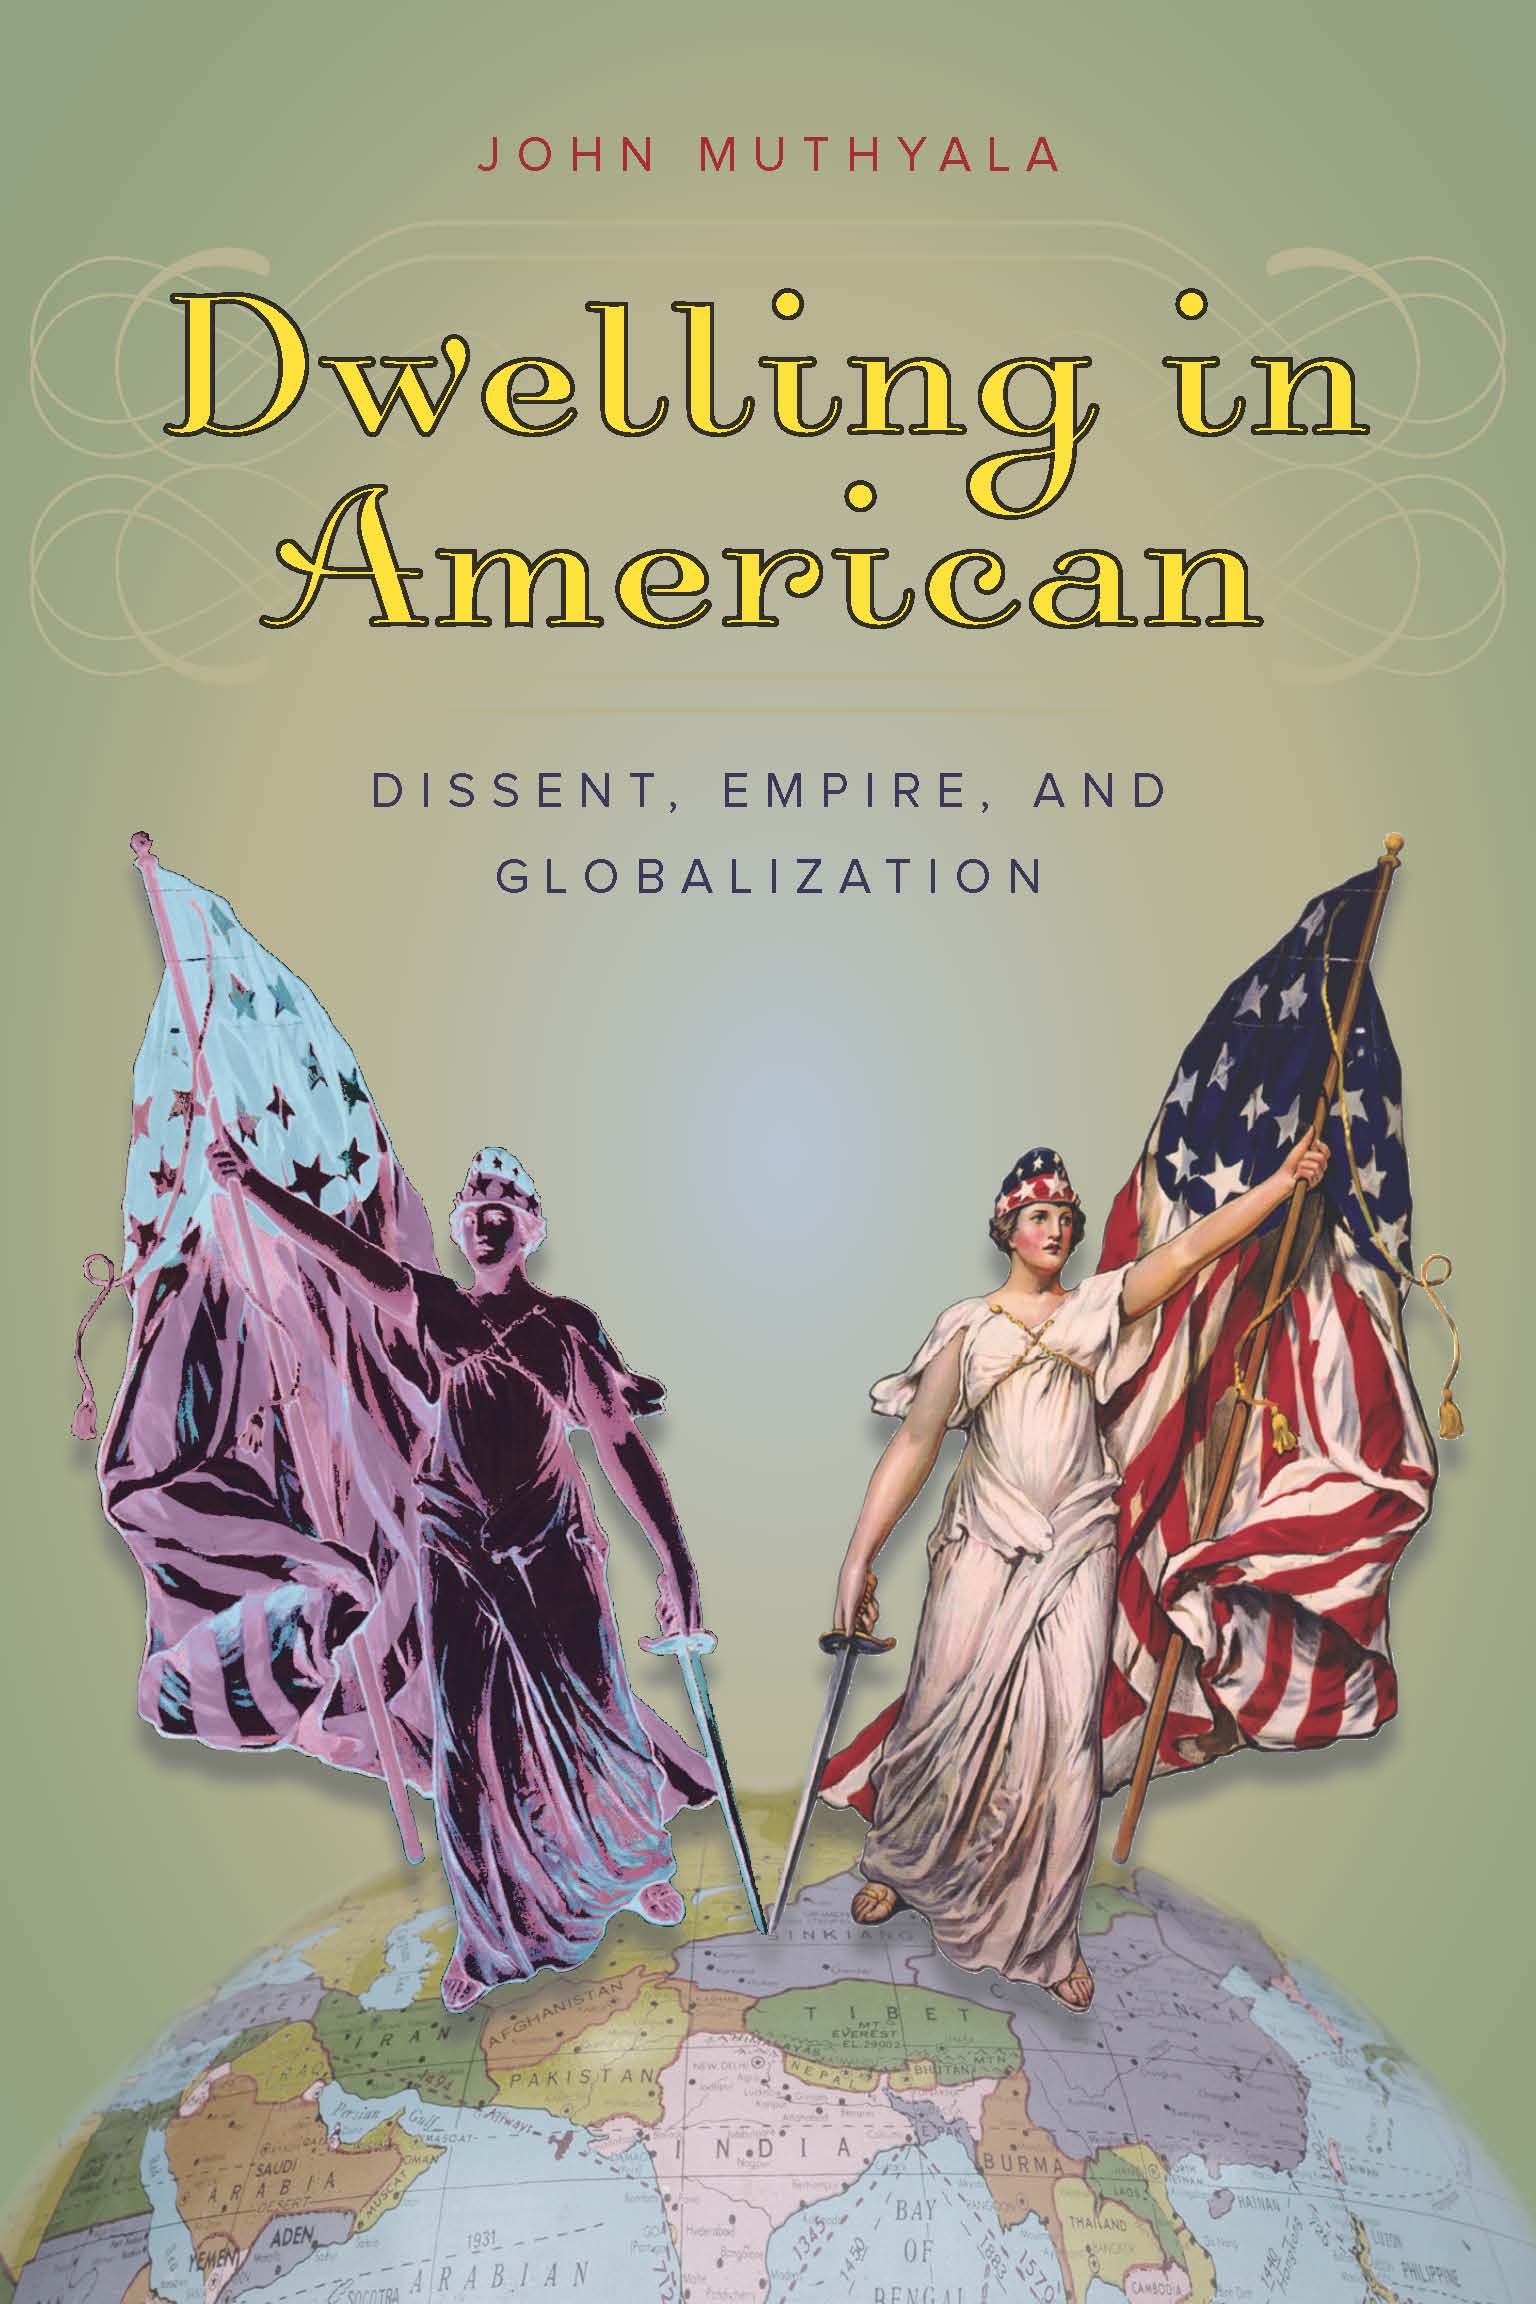 Dwelling in American cover